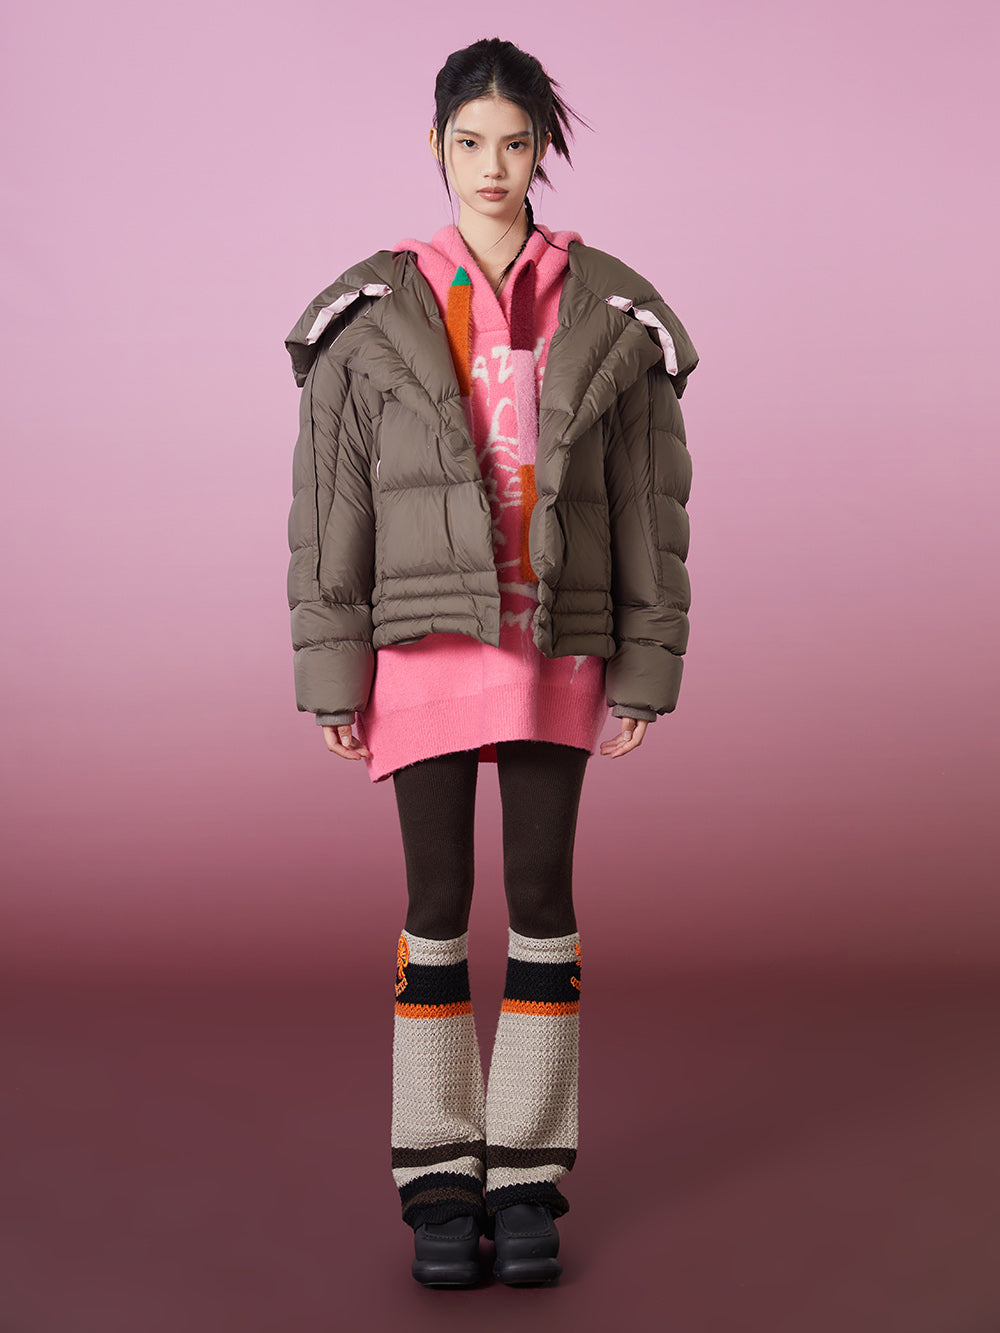 MUKZIN Color Block Fashionable High-quality Outerwear Down Jacket